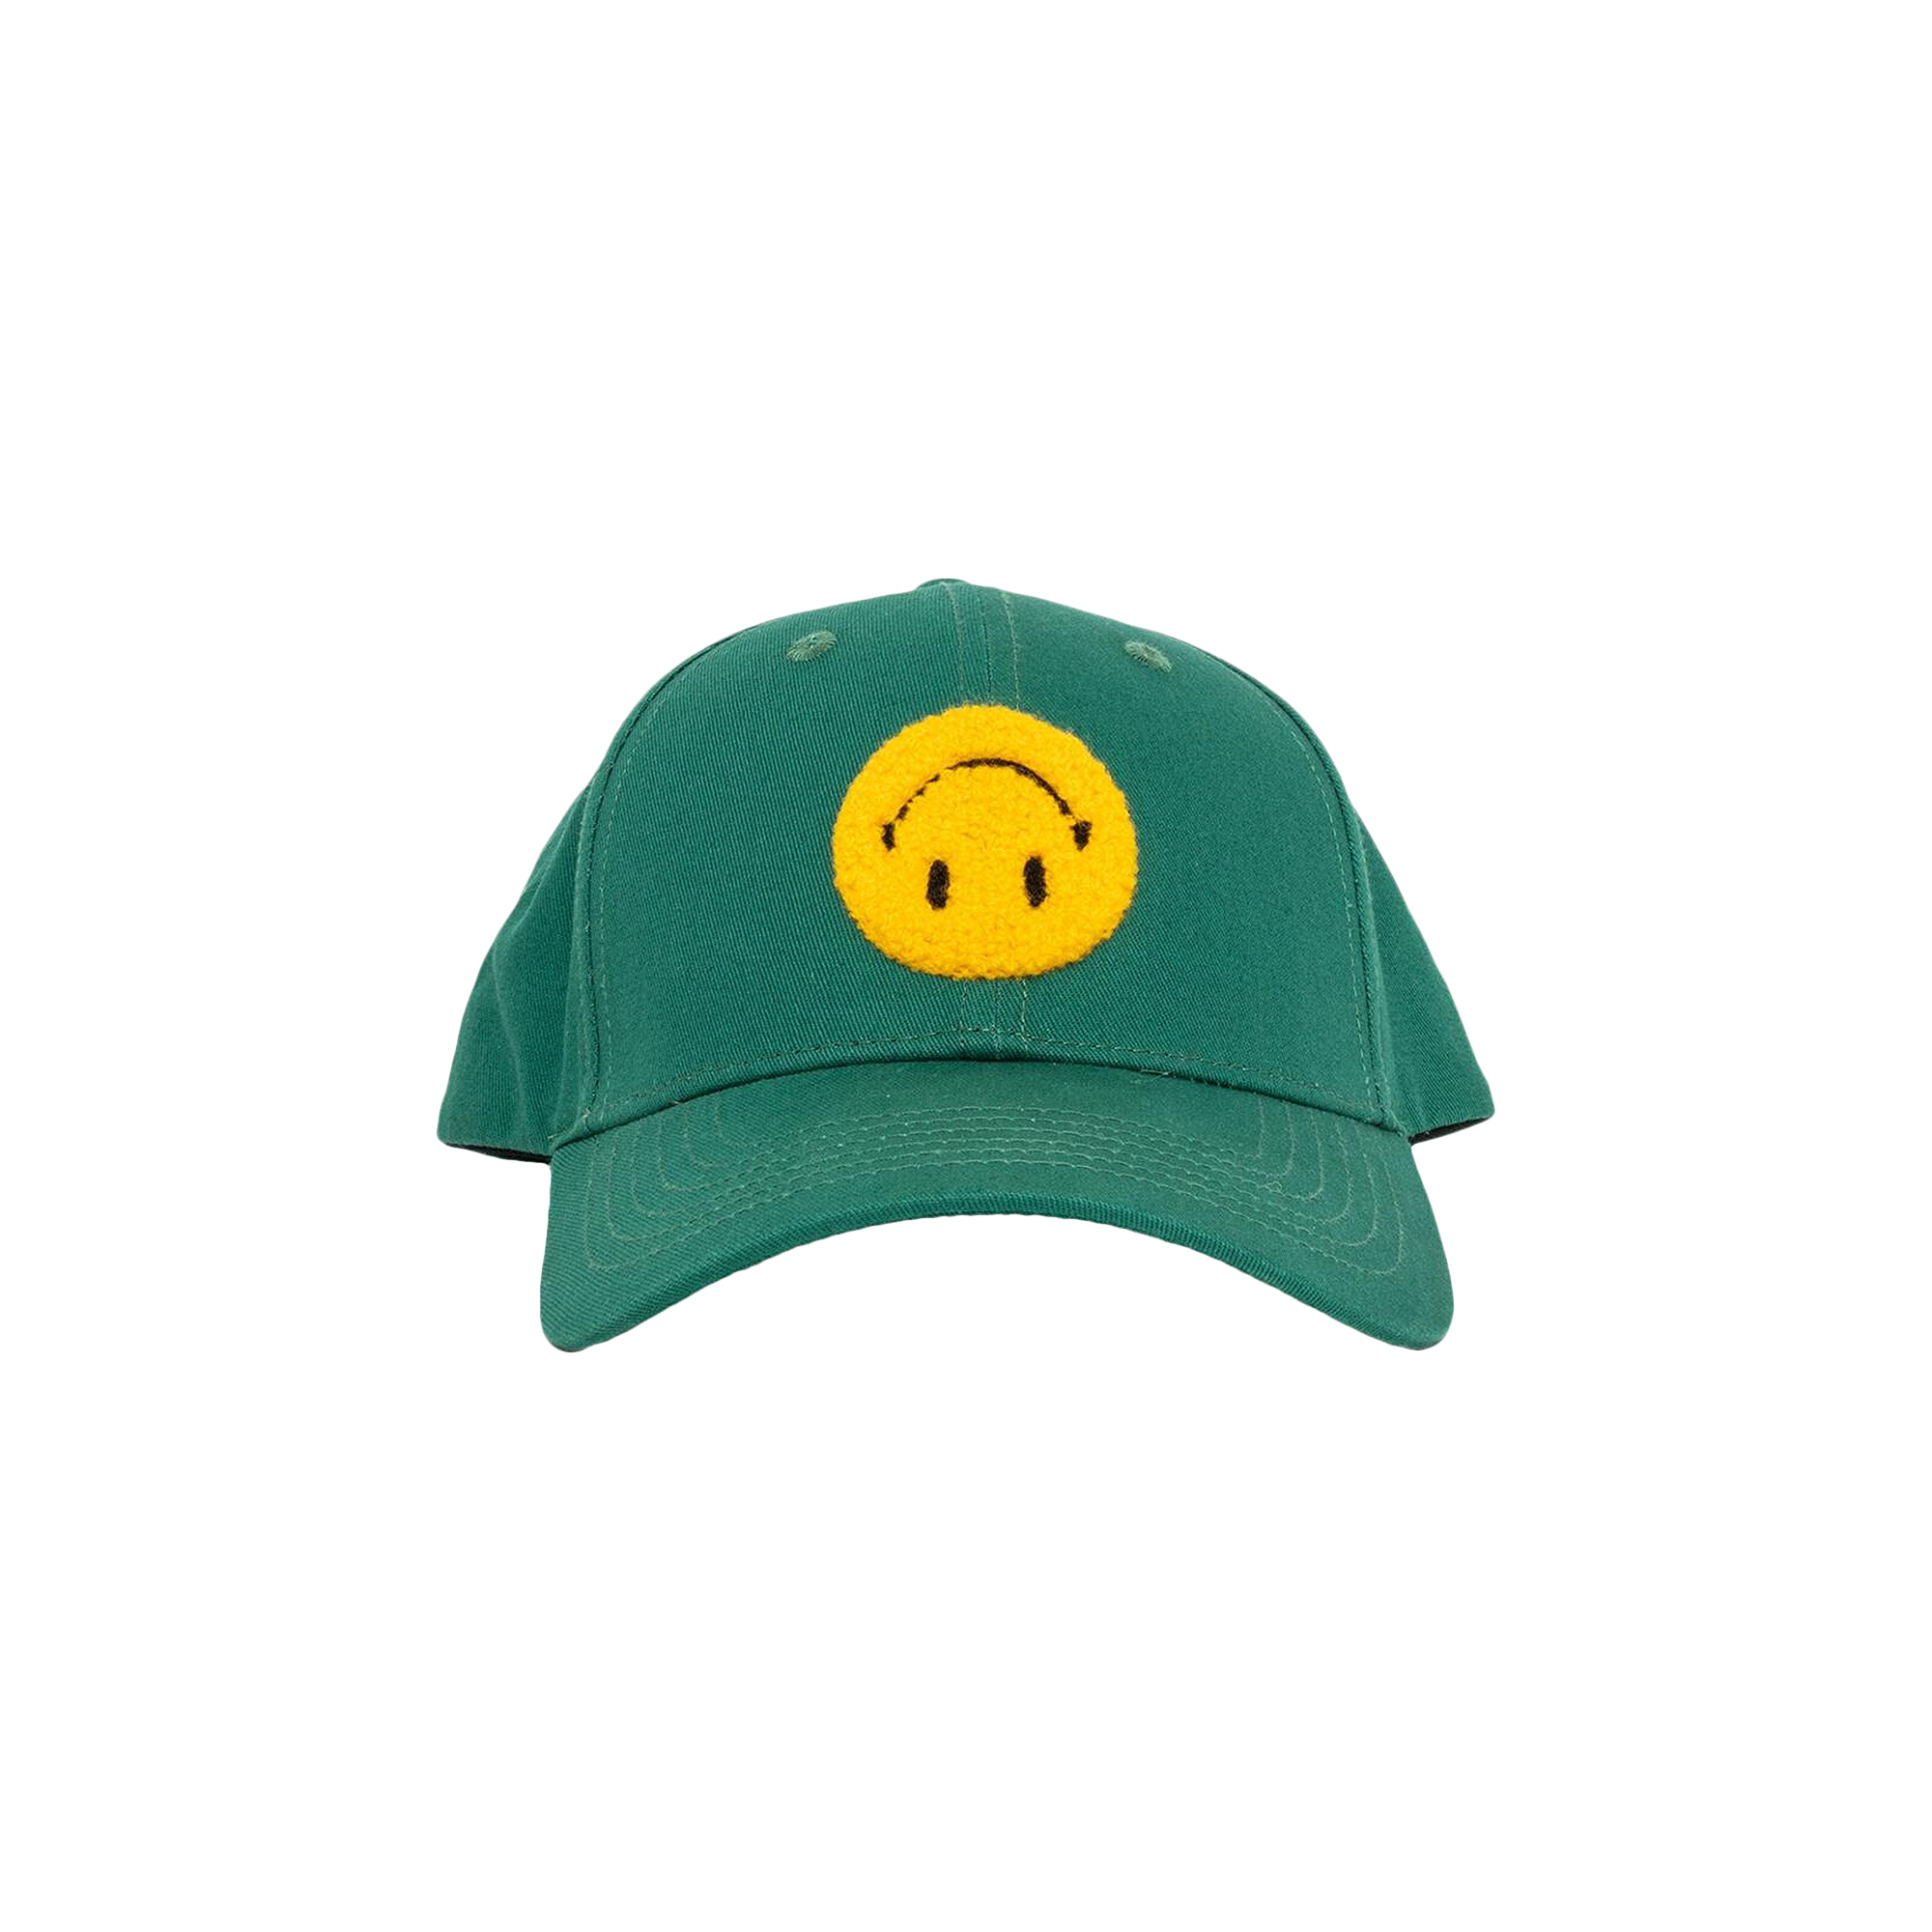 Pre-owned Market Smiley Upside Down 6 Panel Hat 'green'